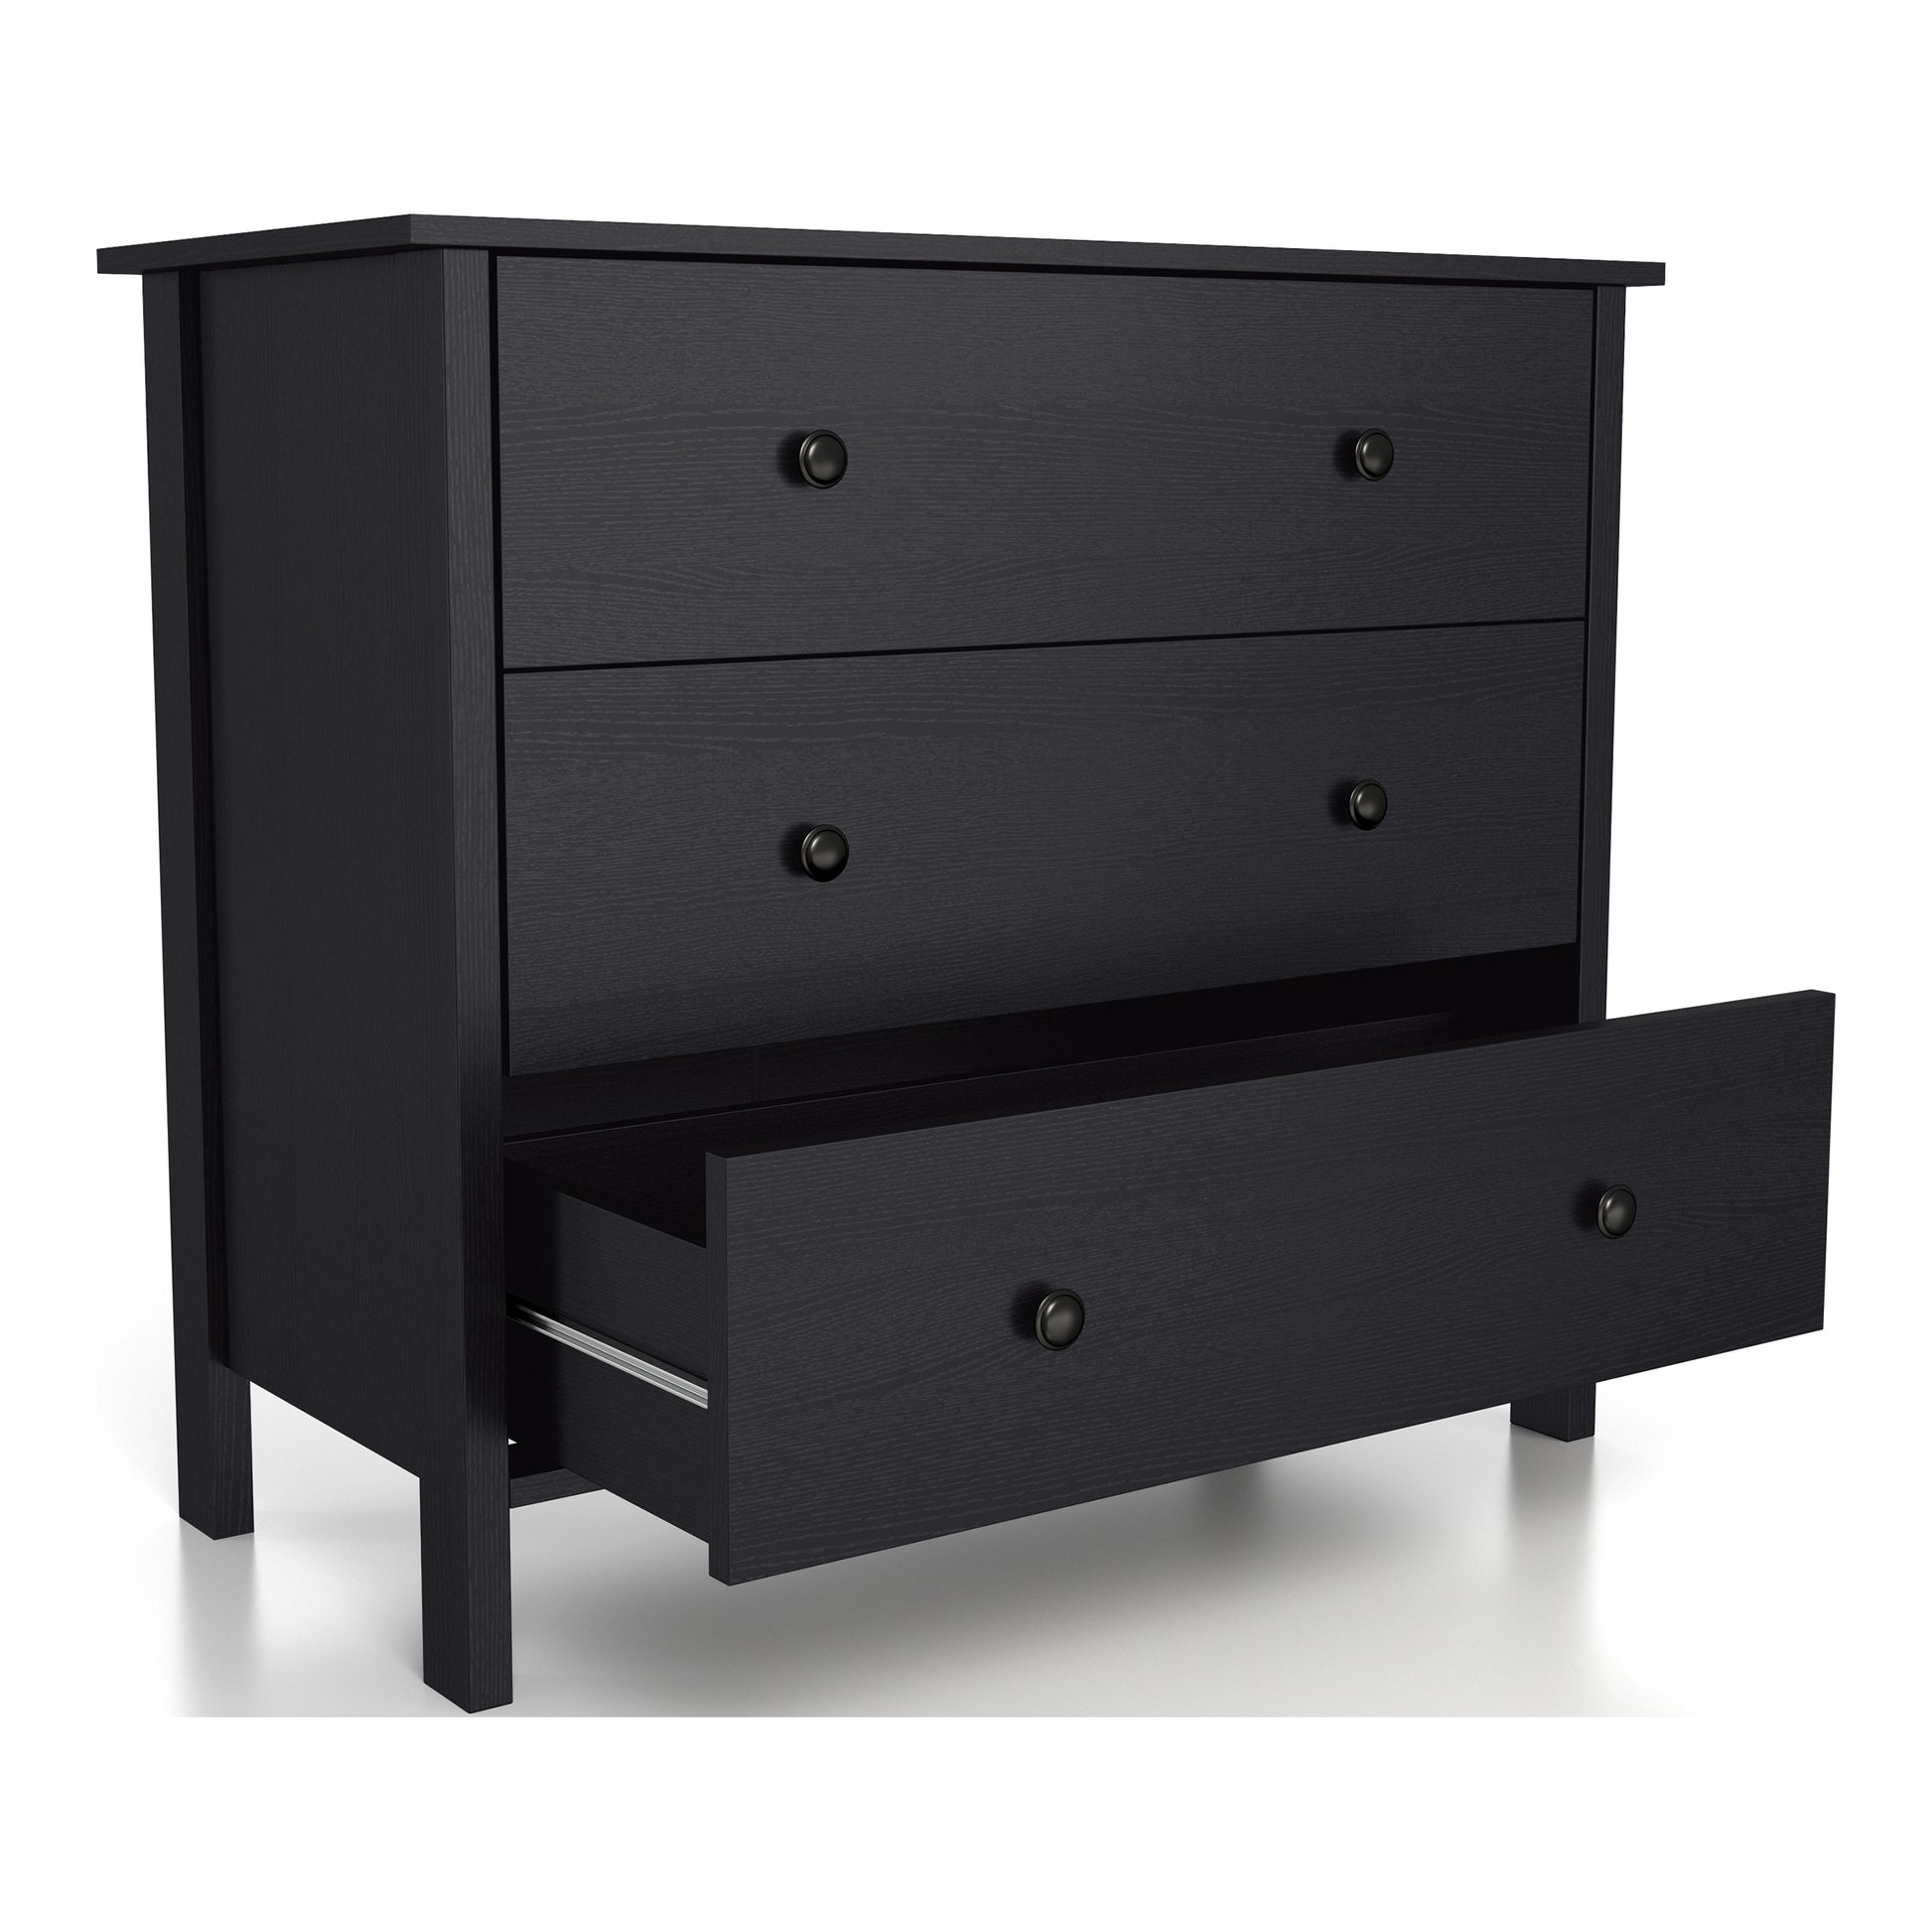 Right angled transitional black three-drawer youth dresser with bottom drawer open on a white background